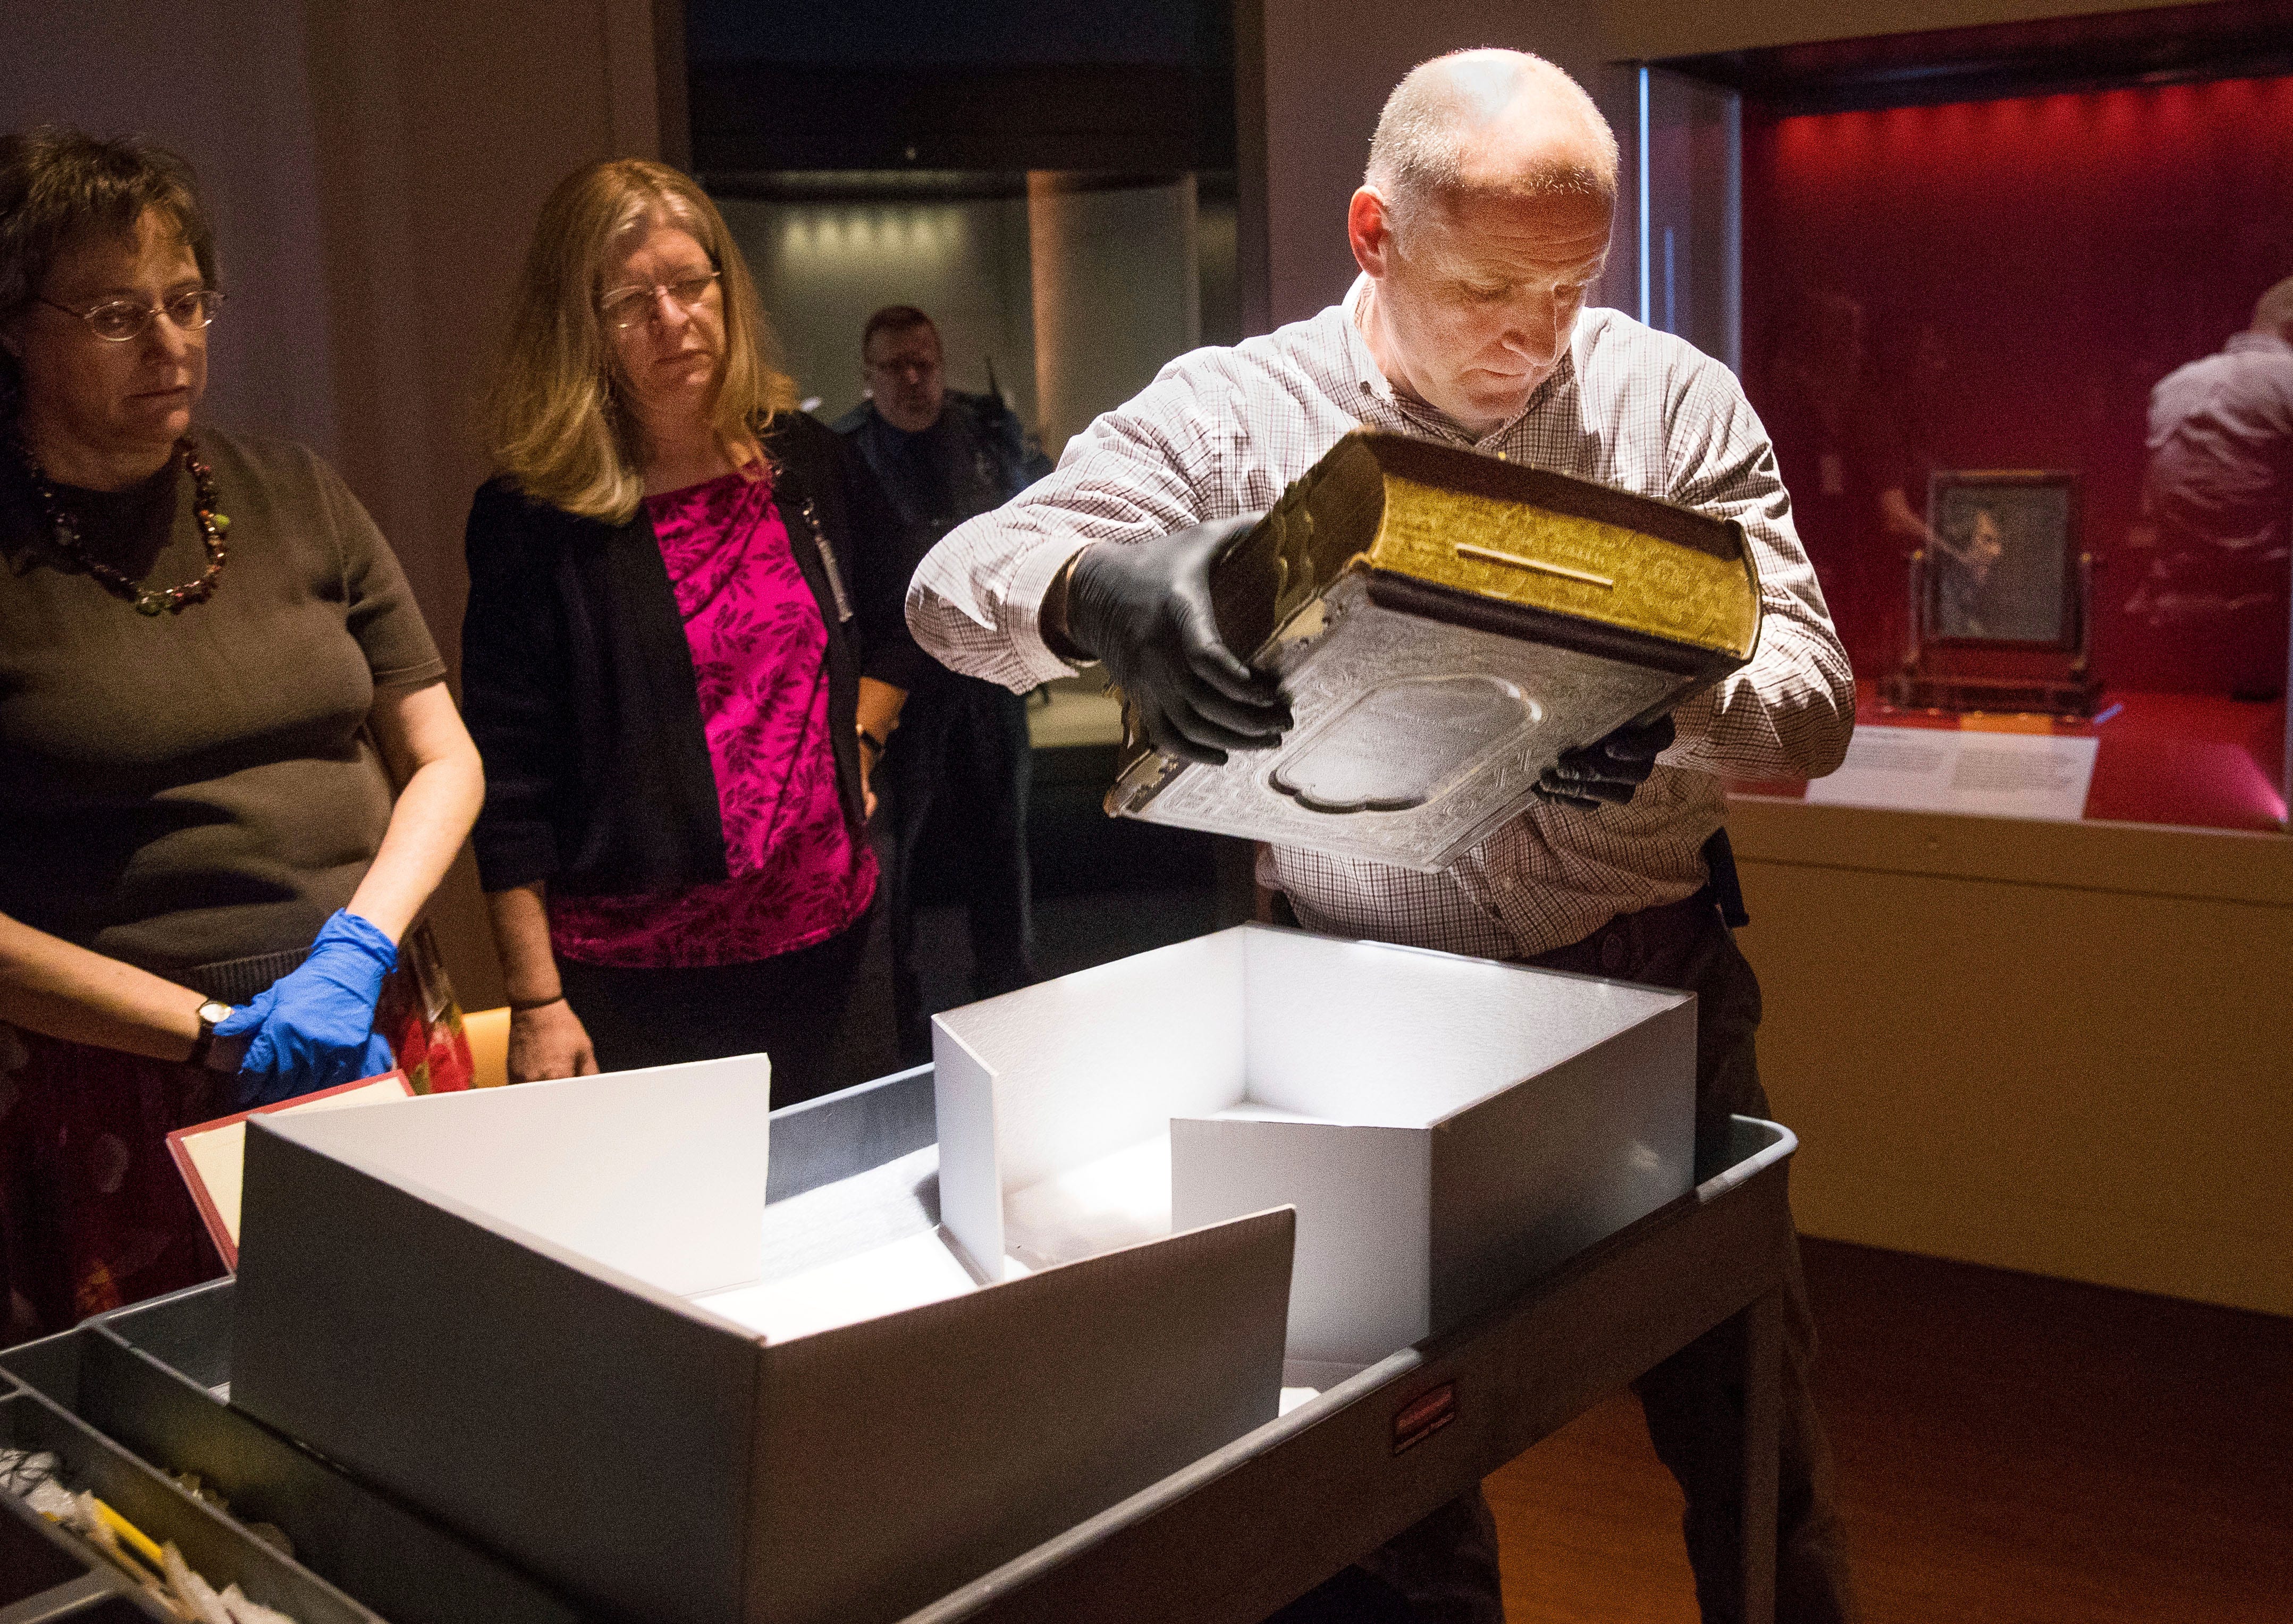 Mike Casey, Exhibits Project Manager at the Abraham Lincoln Presidential Museum, moves the newly acquired Bible into an exhibit at the museum. Abraham Lincoln Presidential Library and Museum Conservator Bonnie Parr and Carla Smith, registrar for the Abraham Lincoln Presidential Library and Museum, are at left.